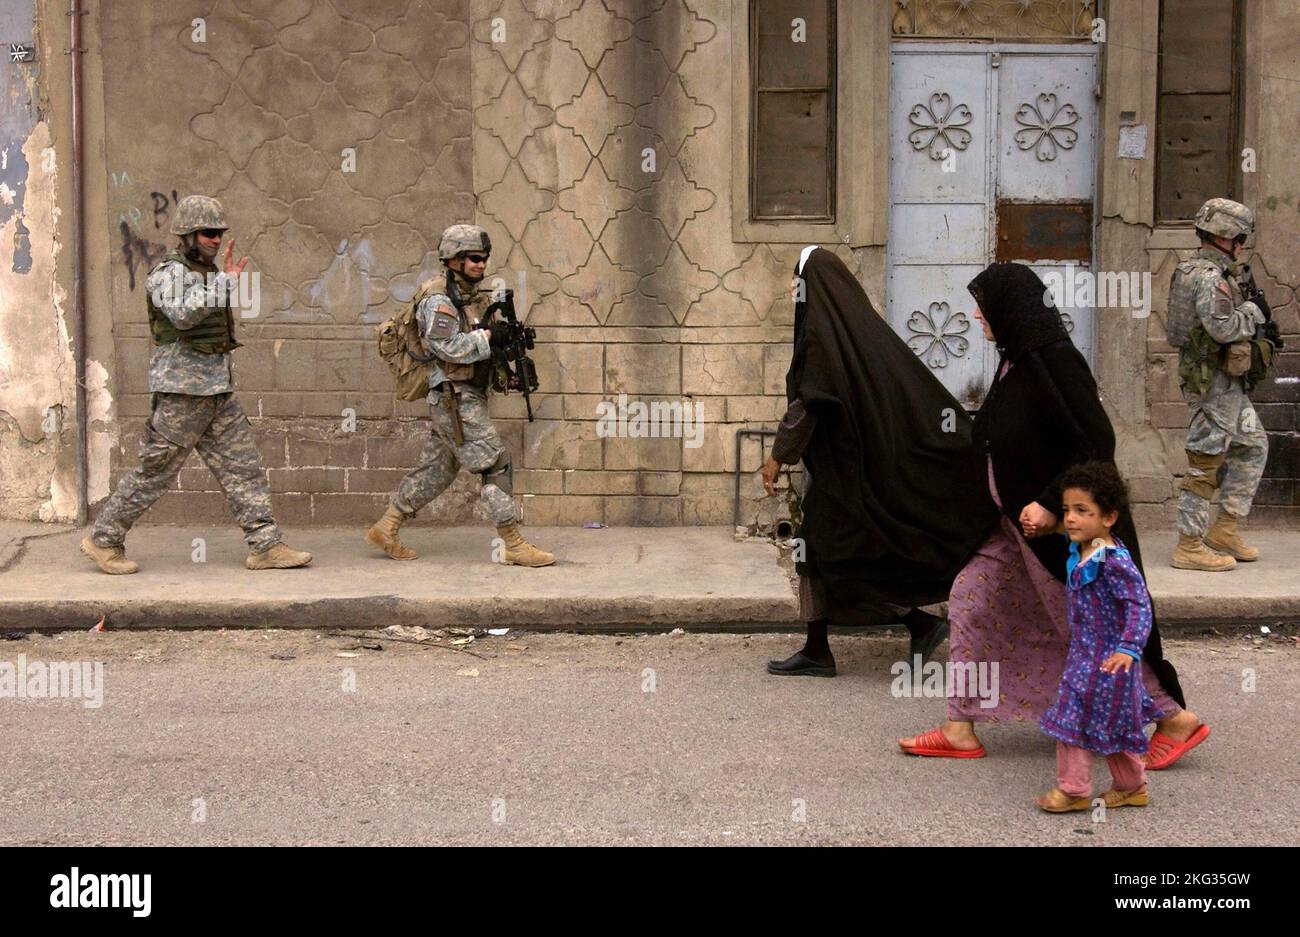 MOSUL, IRAQ - 12 April 2006 - US Army soldiers wave and smile as they pass by two Iraqi women and a child during a neighborhood foot patrol in Mosul, Stock Photo